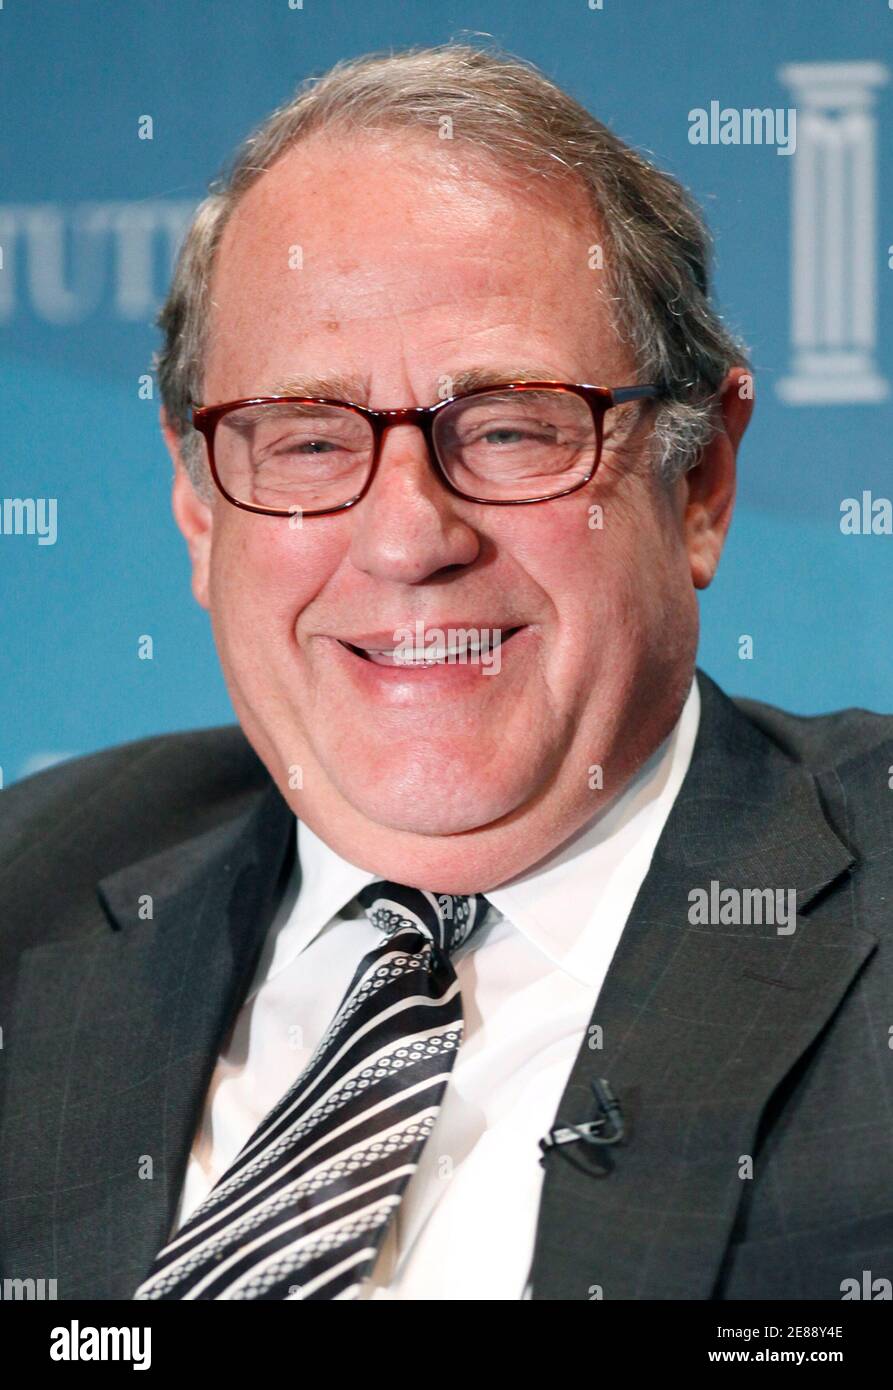 Jerry Reinsdorf, chairman of the Major League Baseball team Chicago White  Sox and the NBA basketball team Chicago Bulls, smiles as he participates in  The Business of Sports panel at the 2010